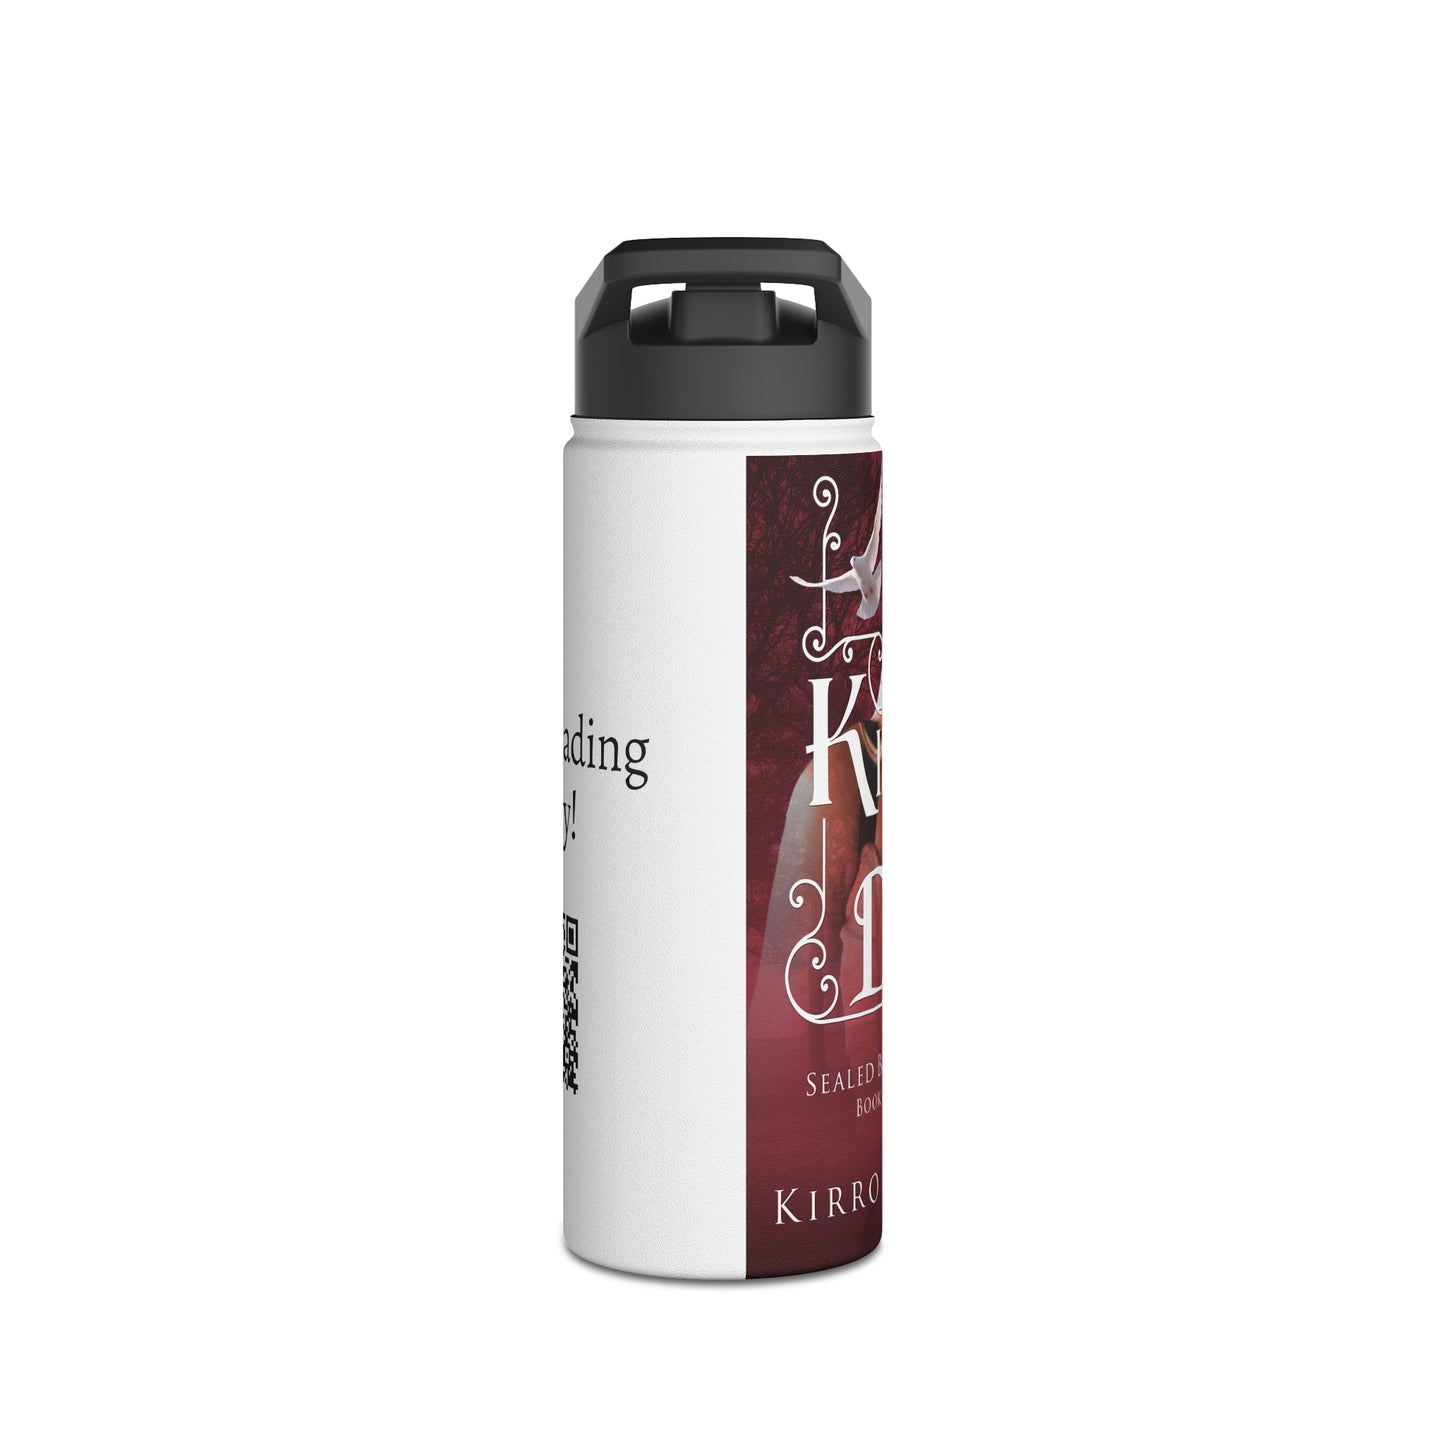 Kill A Dove - Stainless Steel Water Bottle